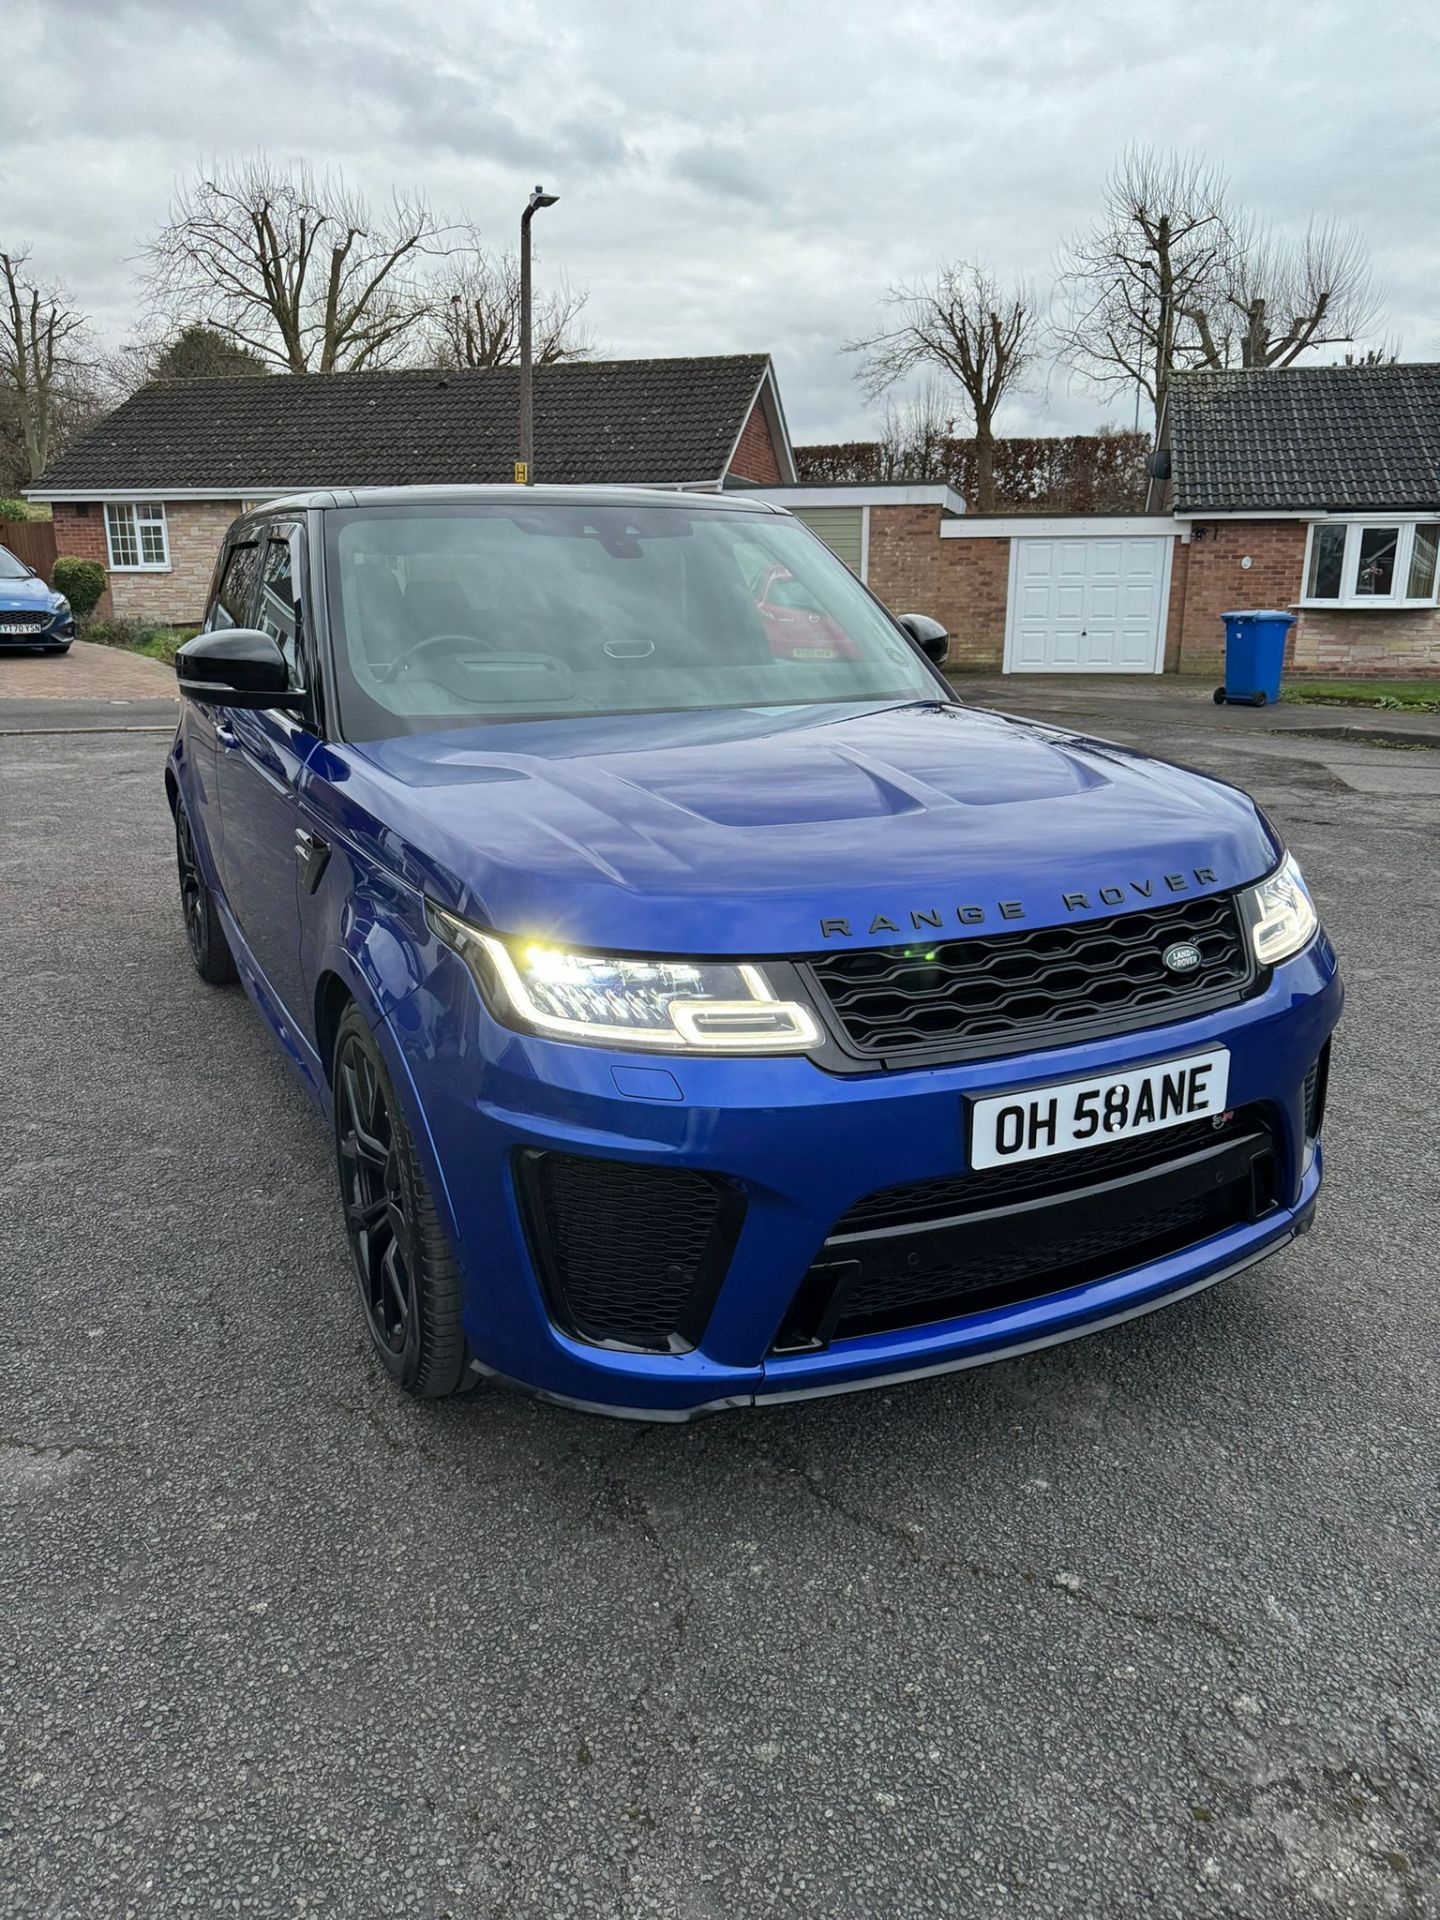 2018 18 RANGE ROVER SVR - 62K MILES WITH FULL LAND ROVER HISTORY - EXTREMELY CLEAN EXAMPLE